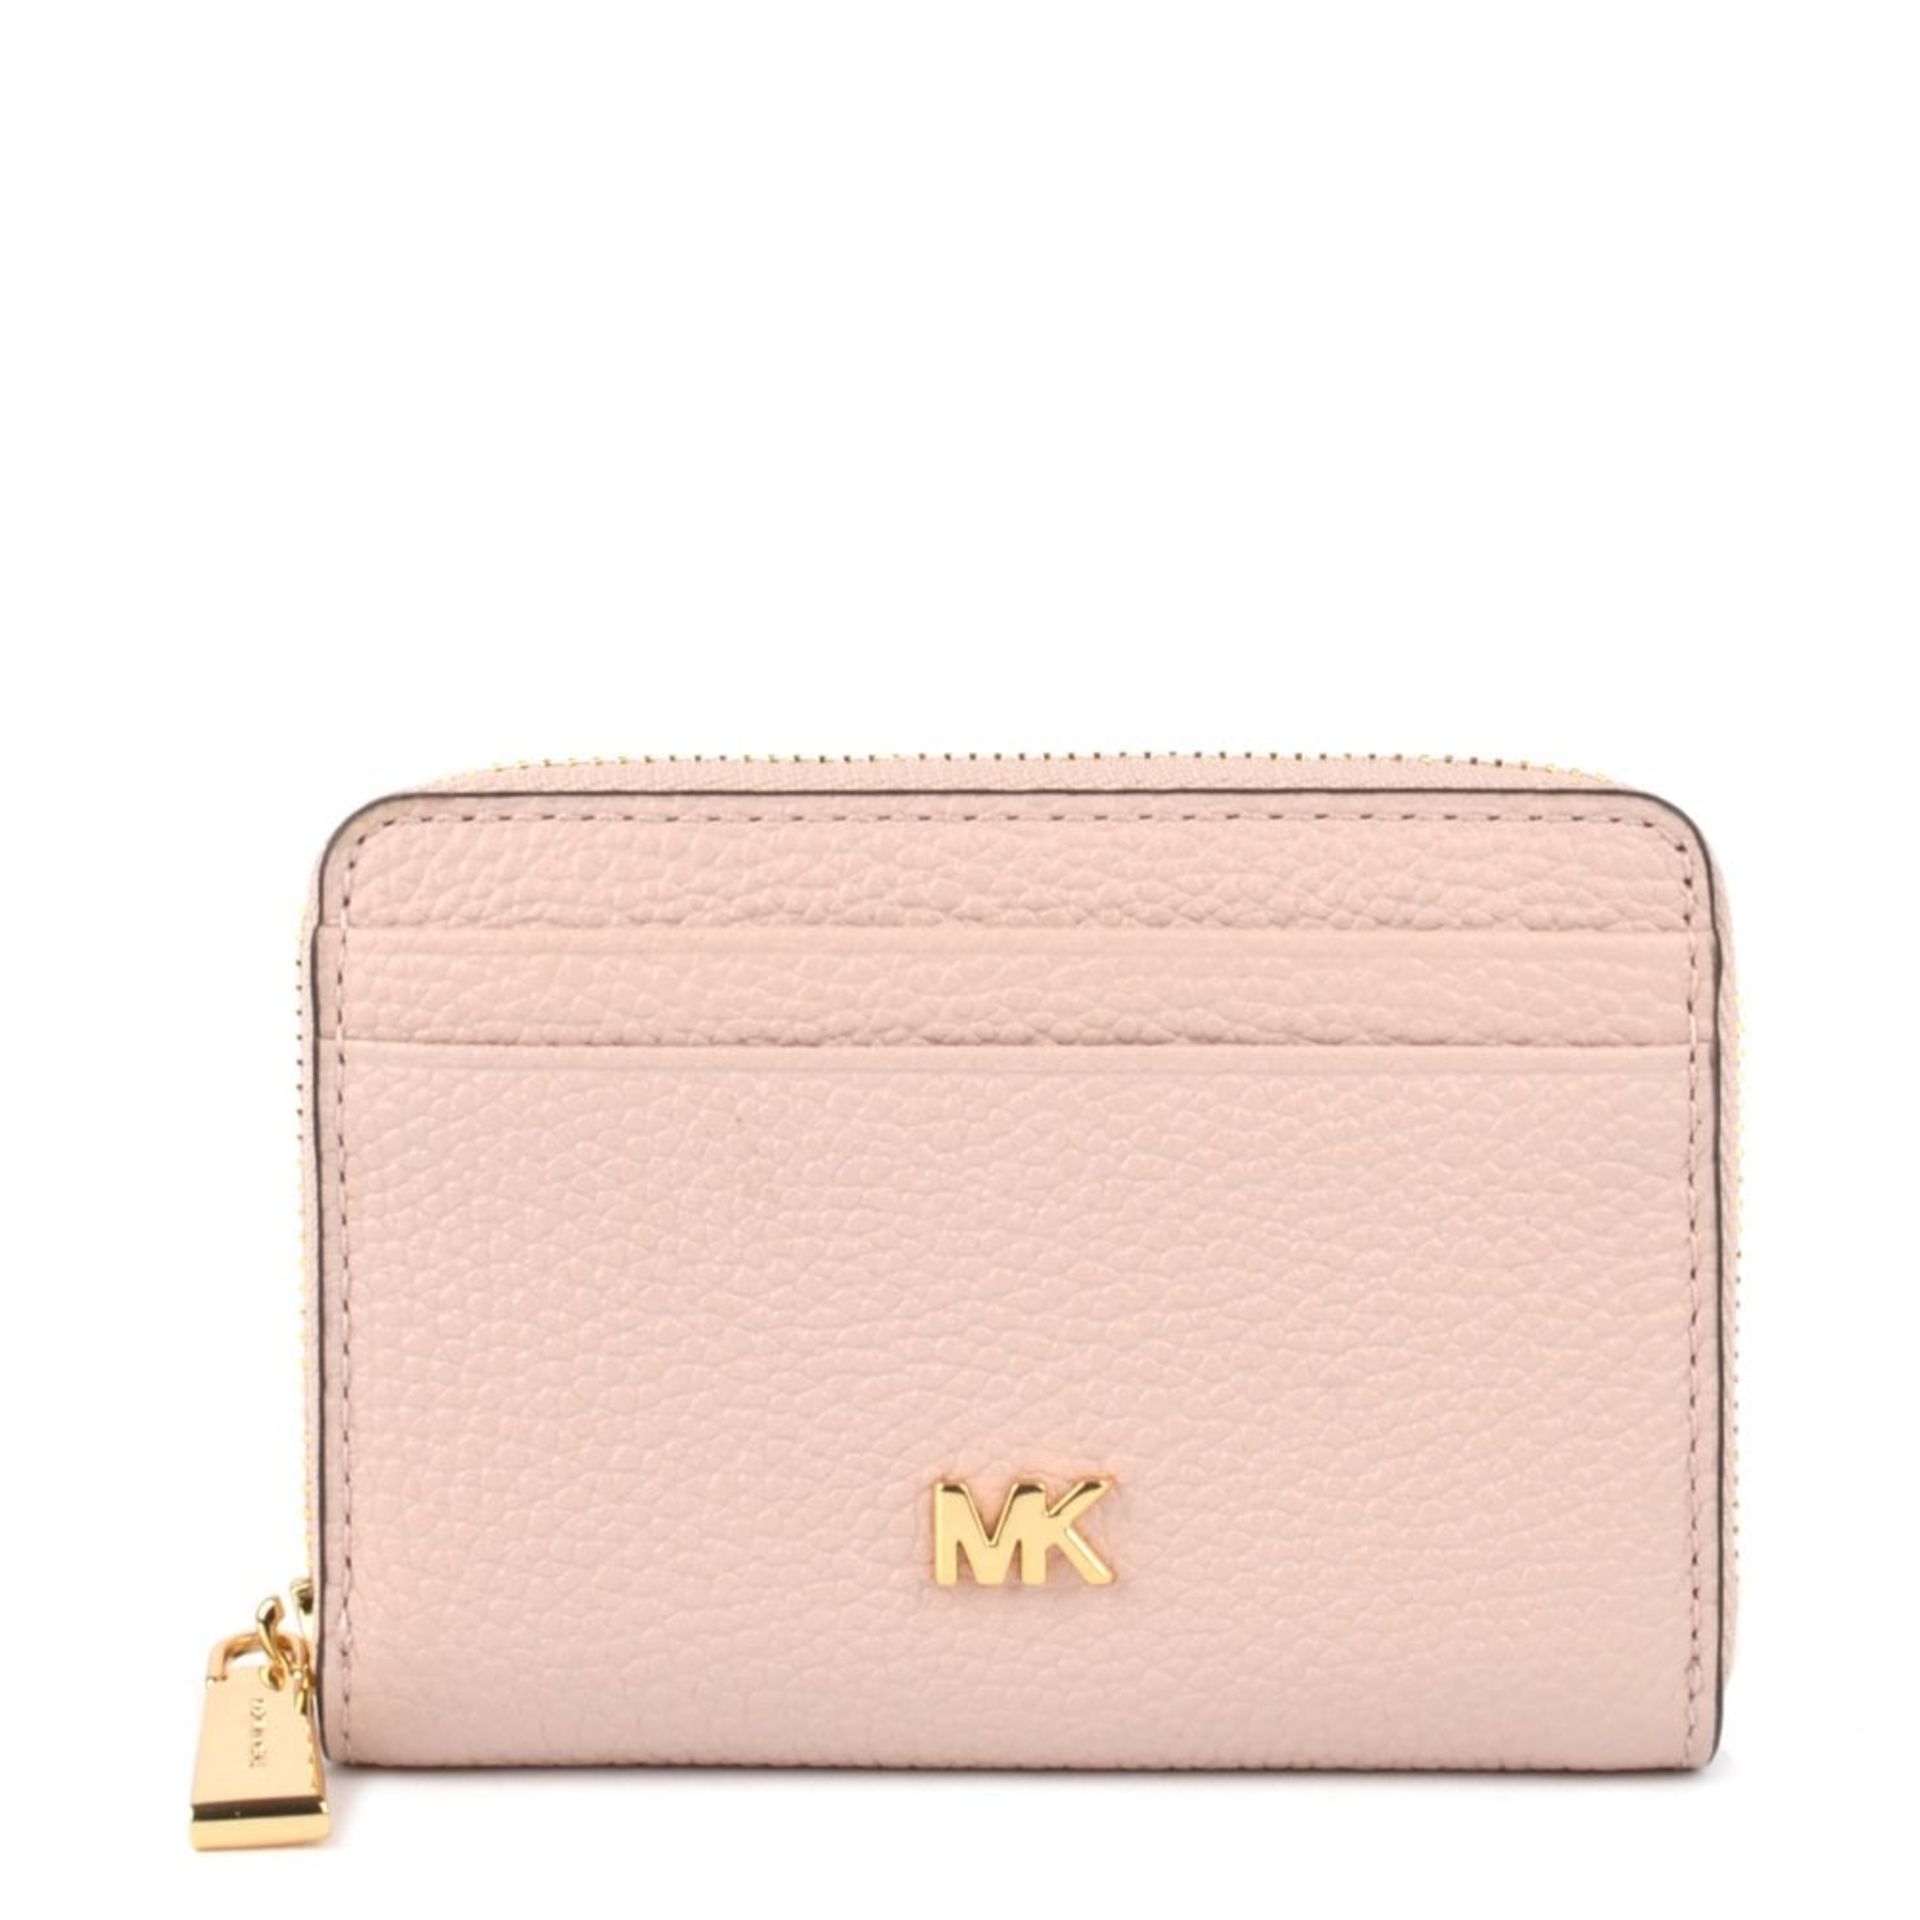 BRAND NEW MICHAEL KORS MONEY PIECES ZA COIN CARD CASE SOFT PINK LEATHER RRP £80 (38133)